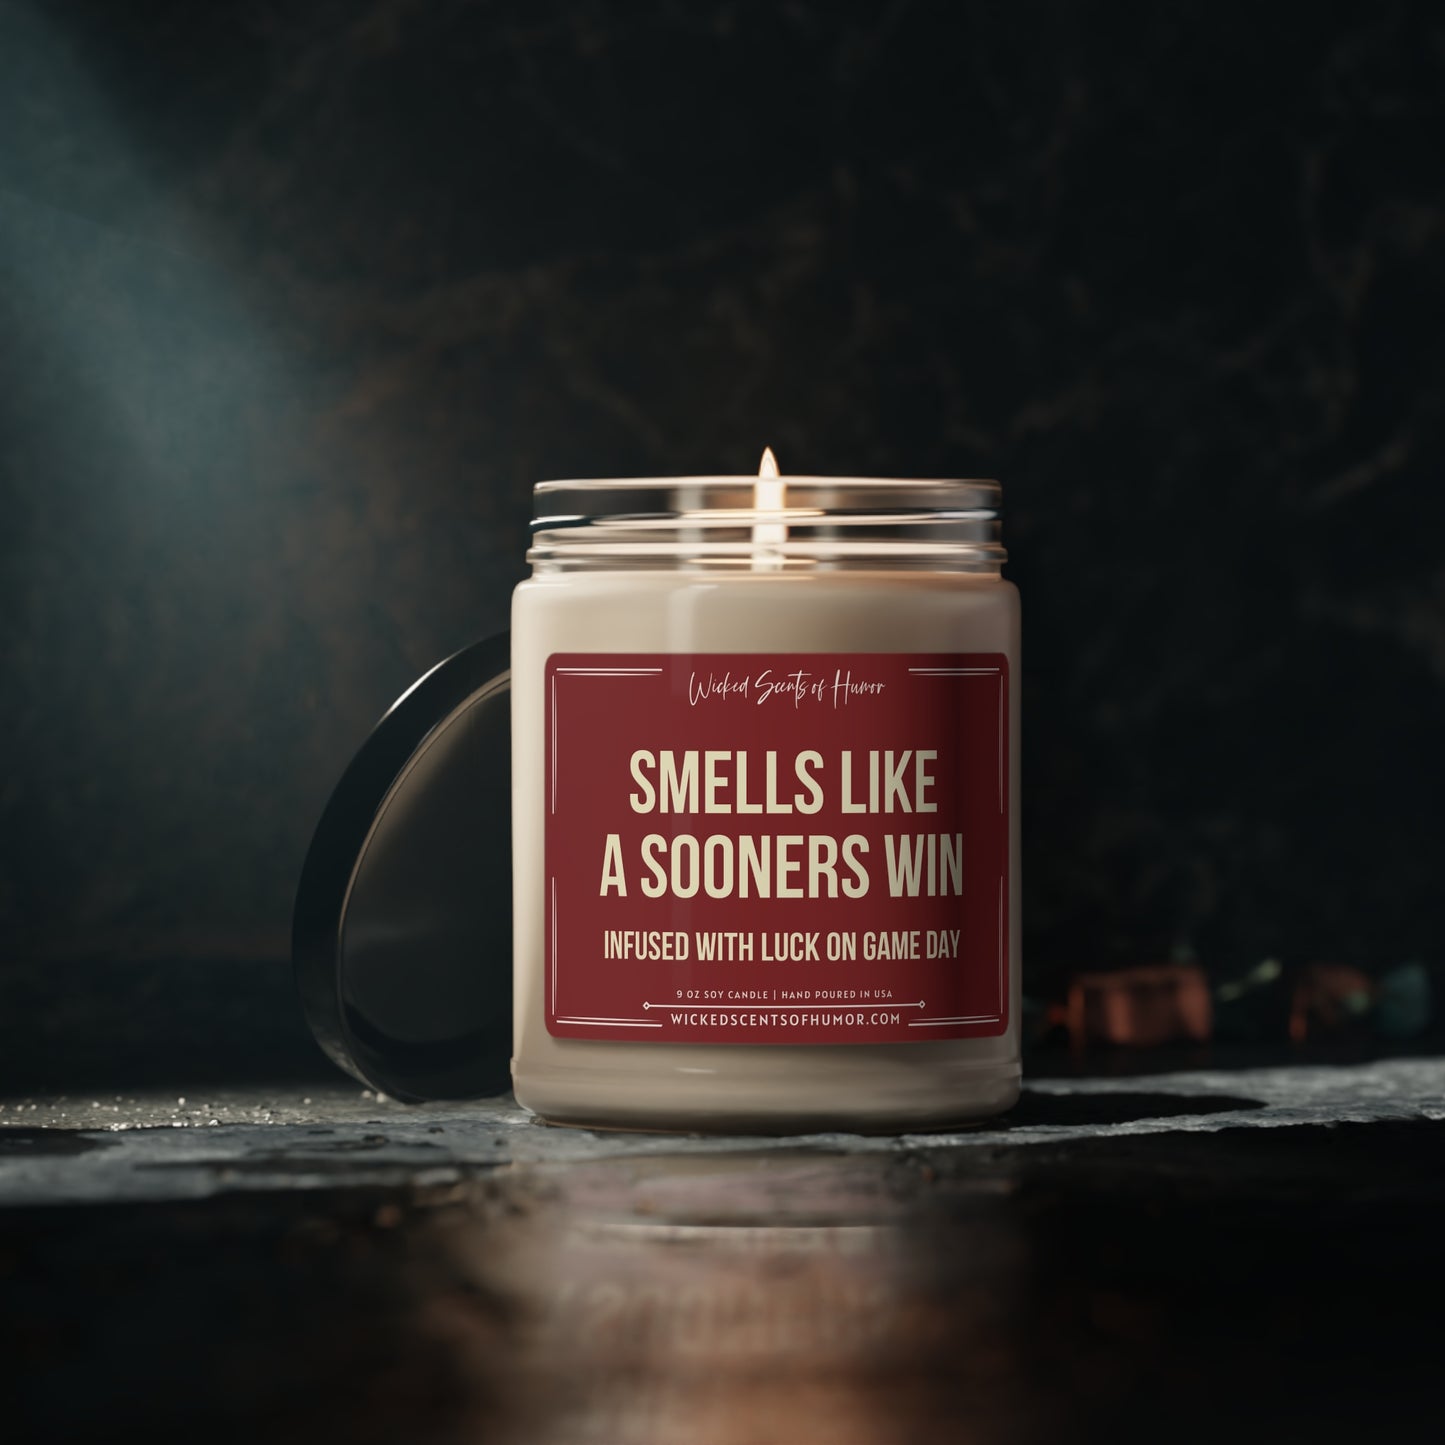 Smells Like Sooners Win Candle, Unique Gift Idea, Oklahoma Sooners Candle, Oklahoma Gift Candle, Game Day Decor, College Spo